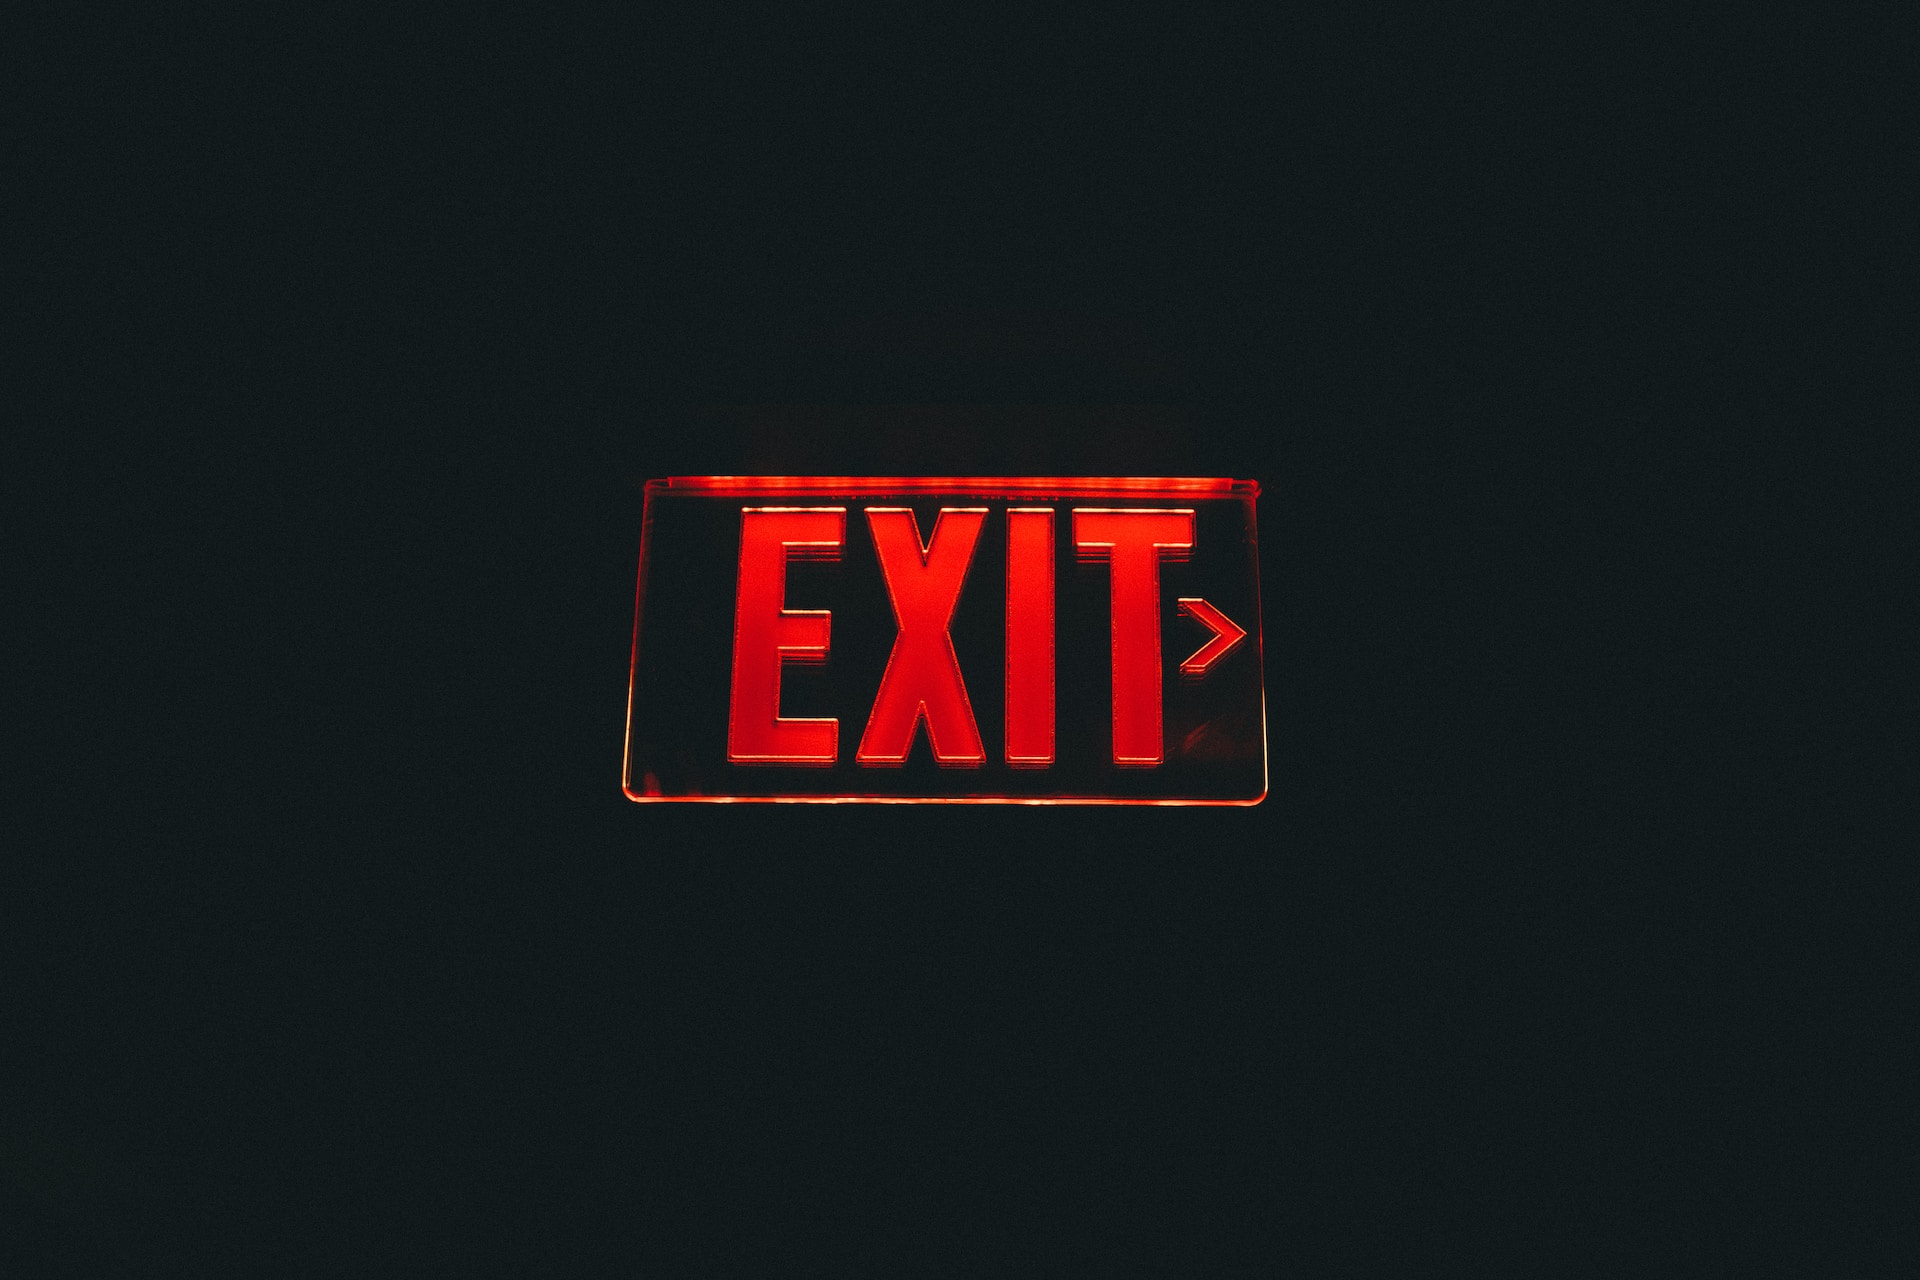 A red fire exit sign